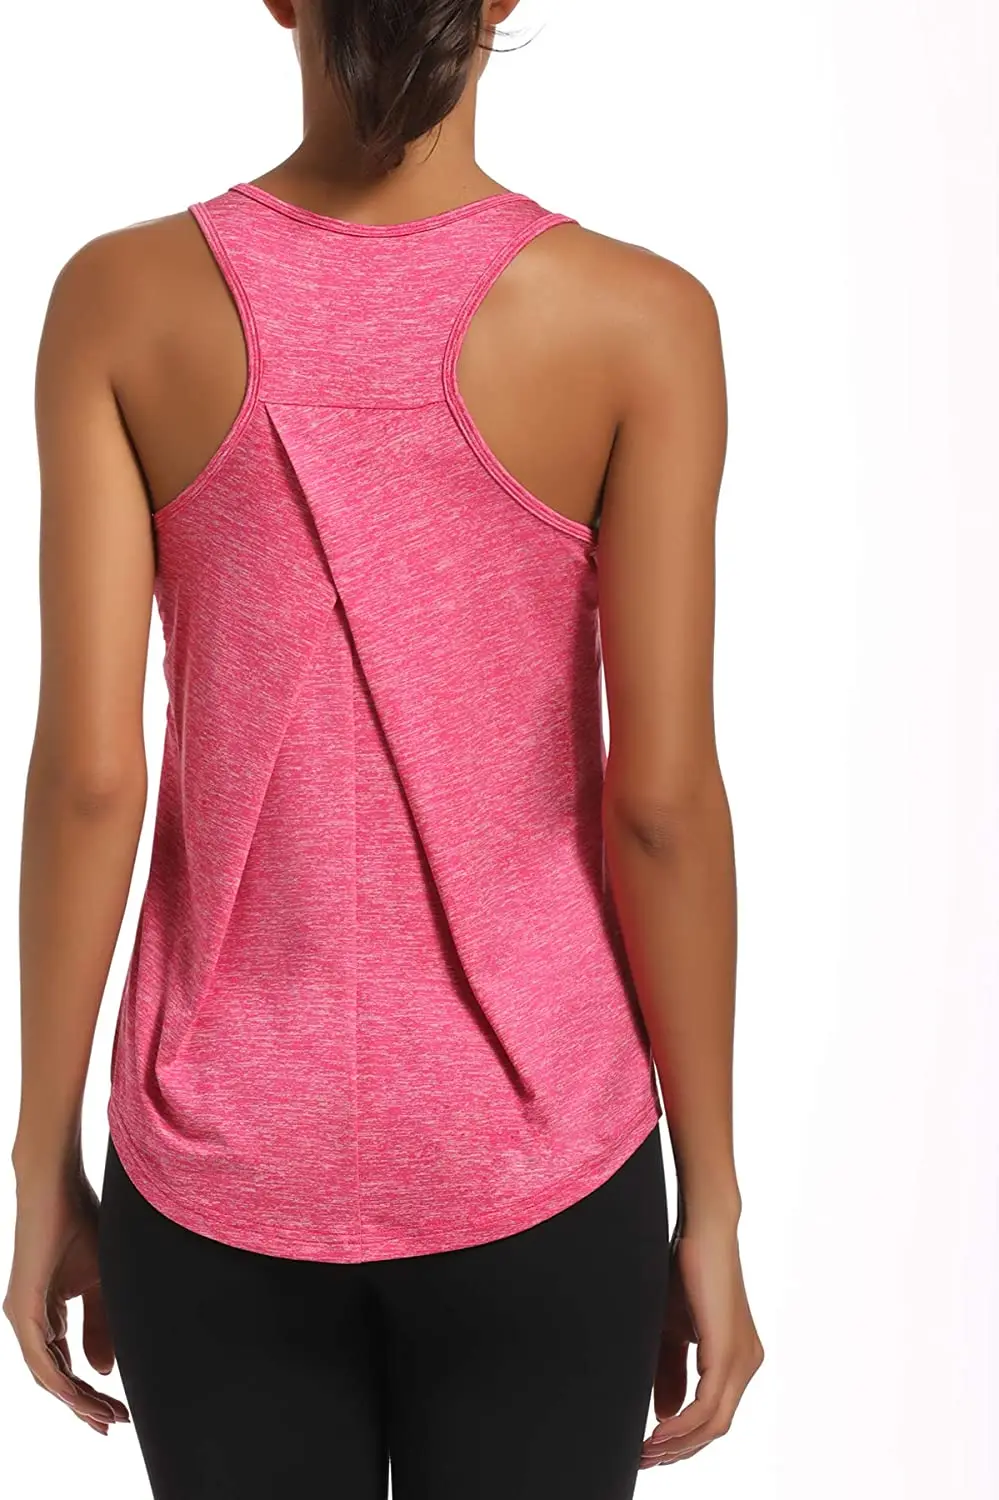 Womens Workout Tops Yoga Tops Athletic Shirts Gym Racerback Tank Top for Women